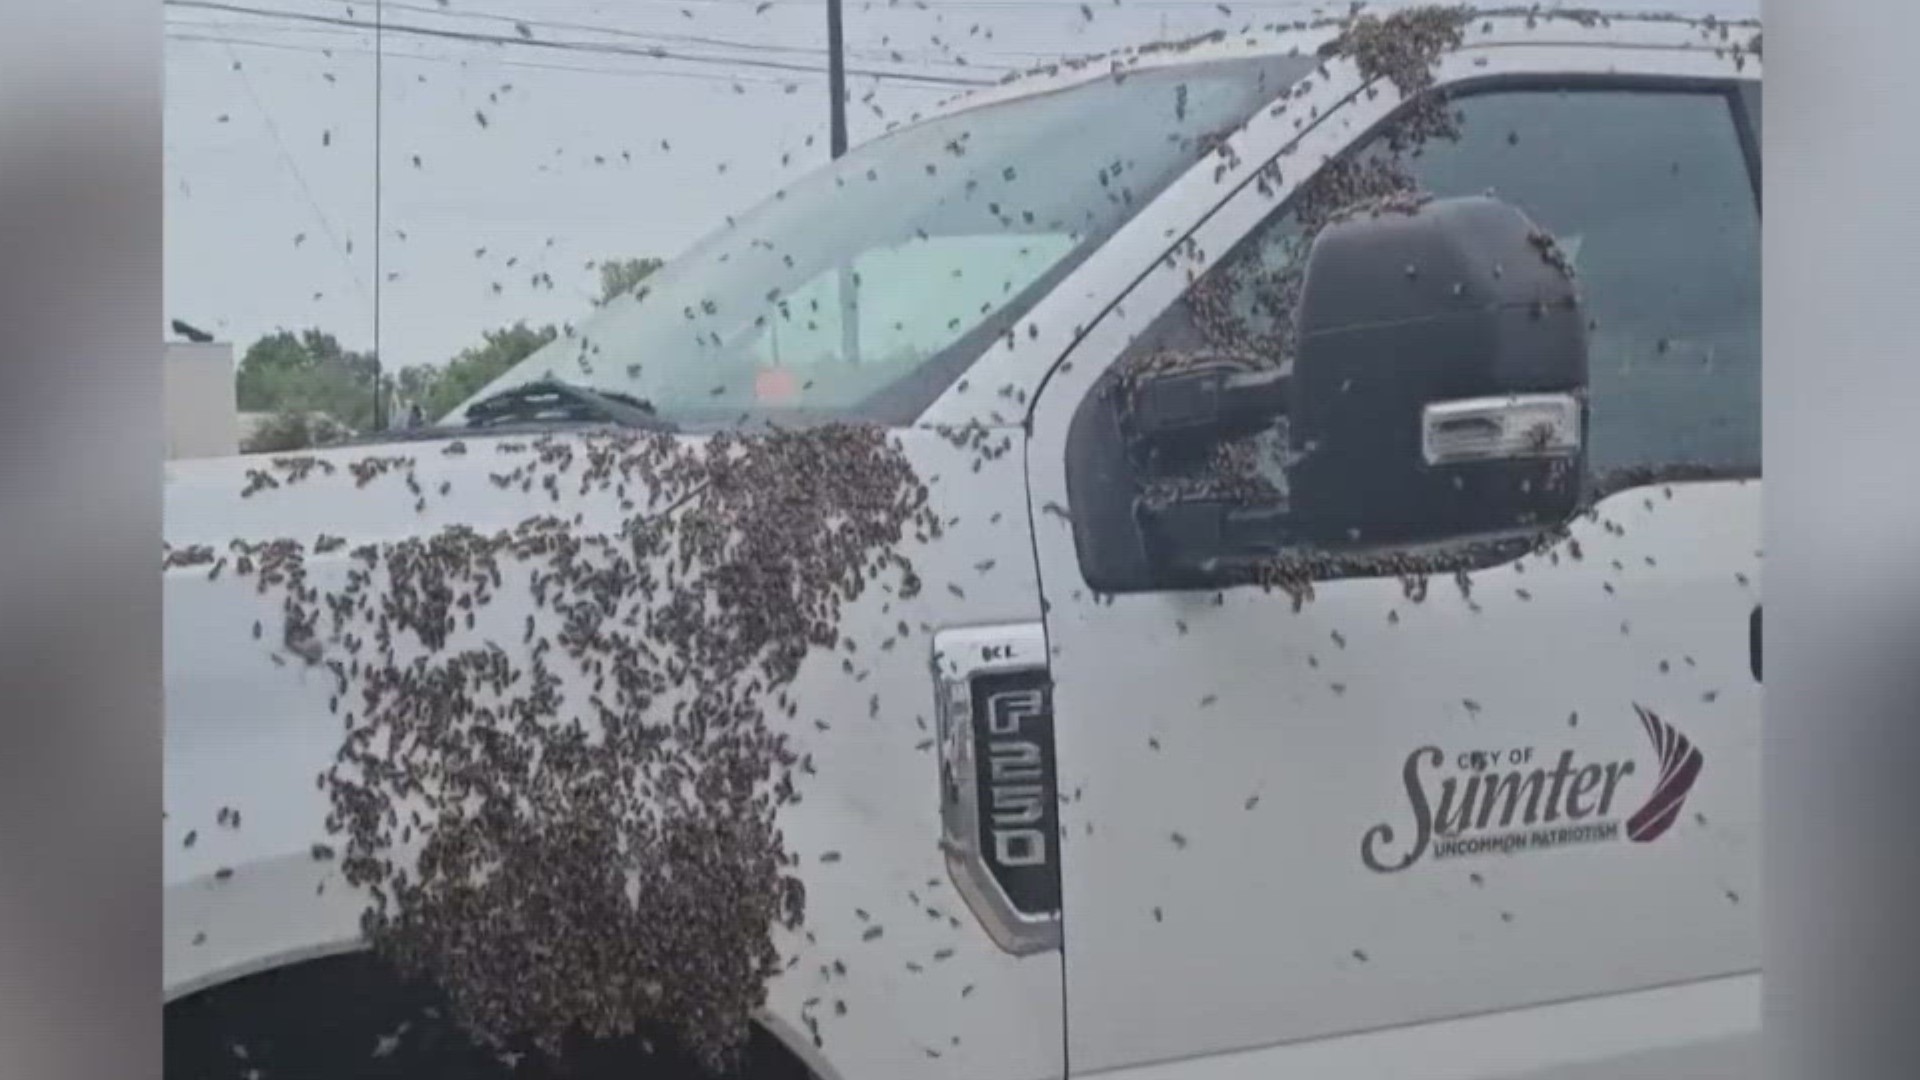 A swarm of bees took over a truck belonging to the City of Sumter on Tuesday. Here's what happened.